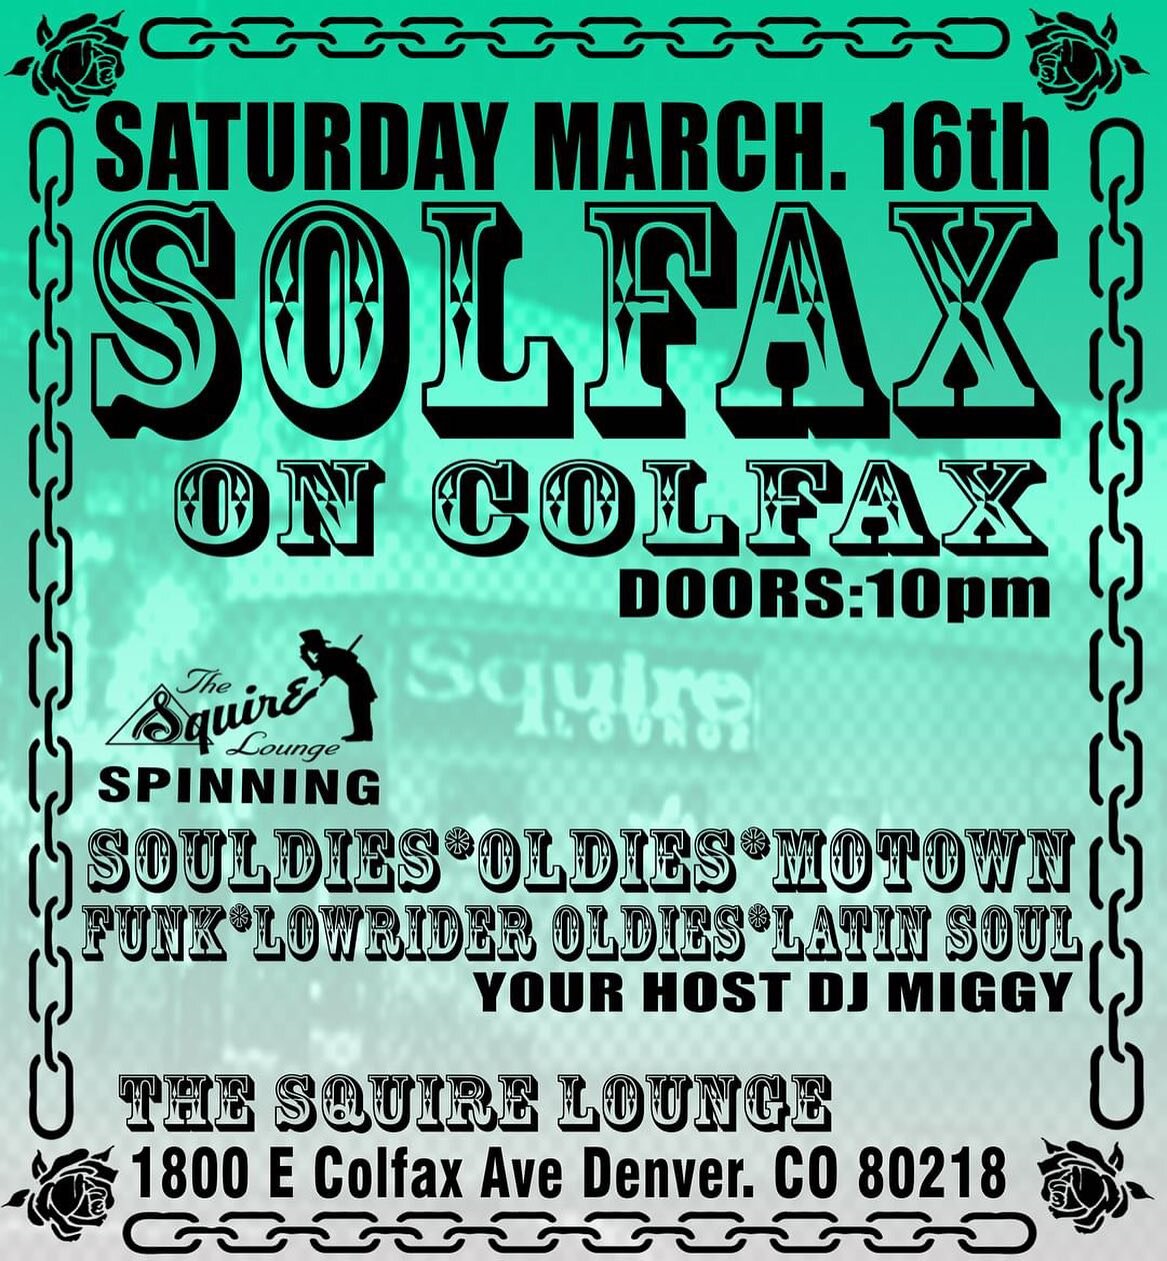 Souldies, Oldies, and Good times with @miggy7575 3.16 10pm @squirecolfaxdenver 

#squireloungedenver #colfaxbars #coldfax #colfaxlove #colfaxmusic #comepartywithus #squirelounge #squireloungecolfax #denverdivebars